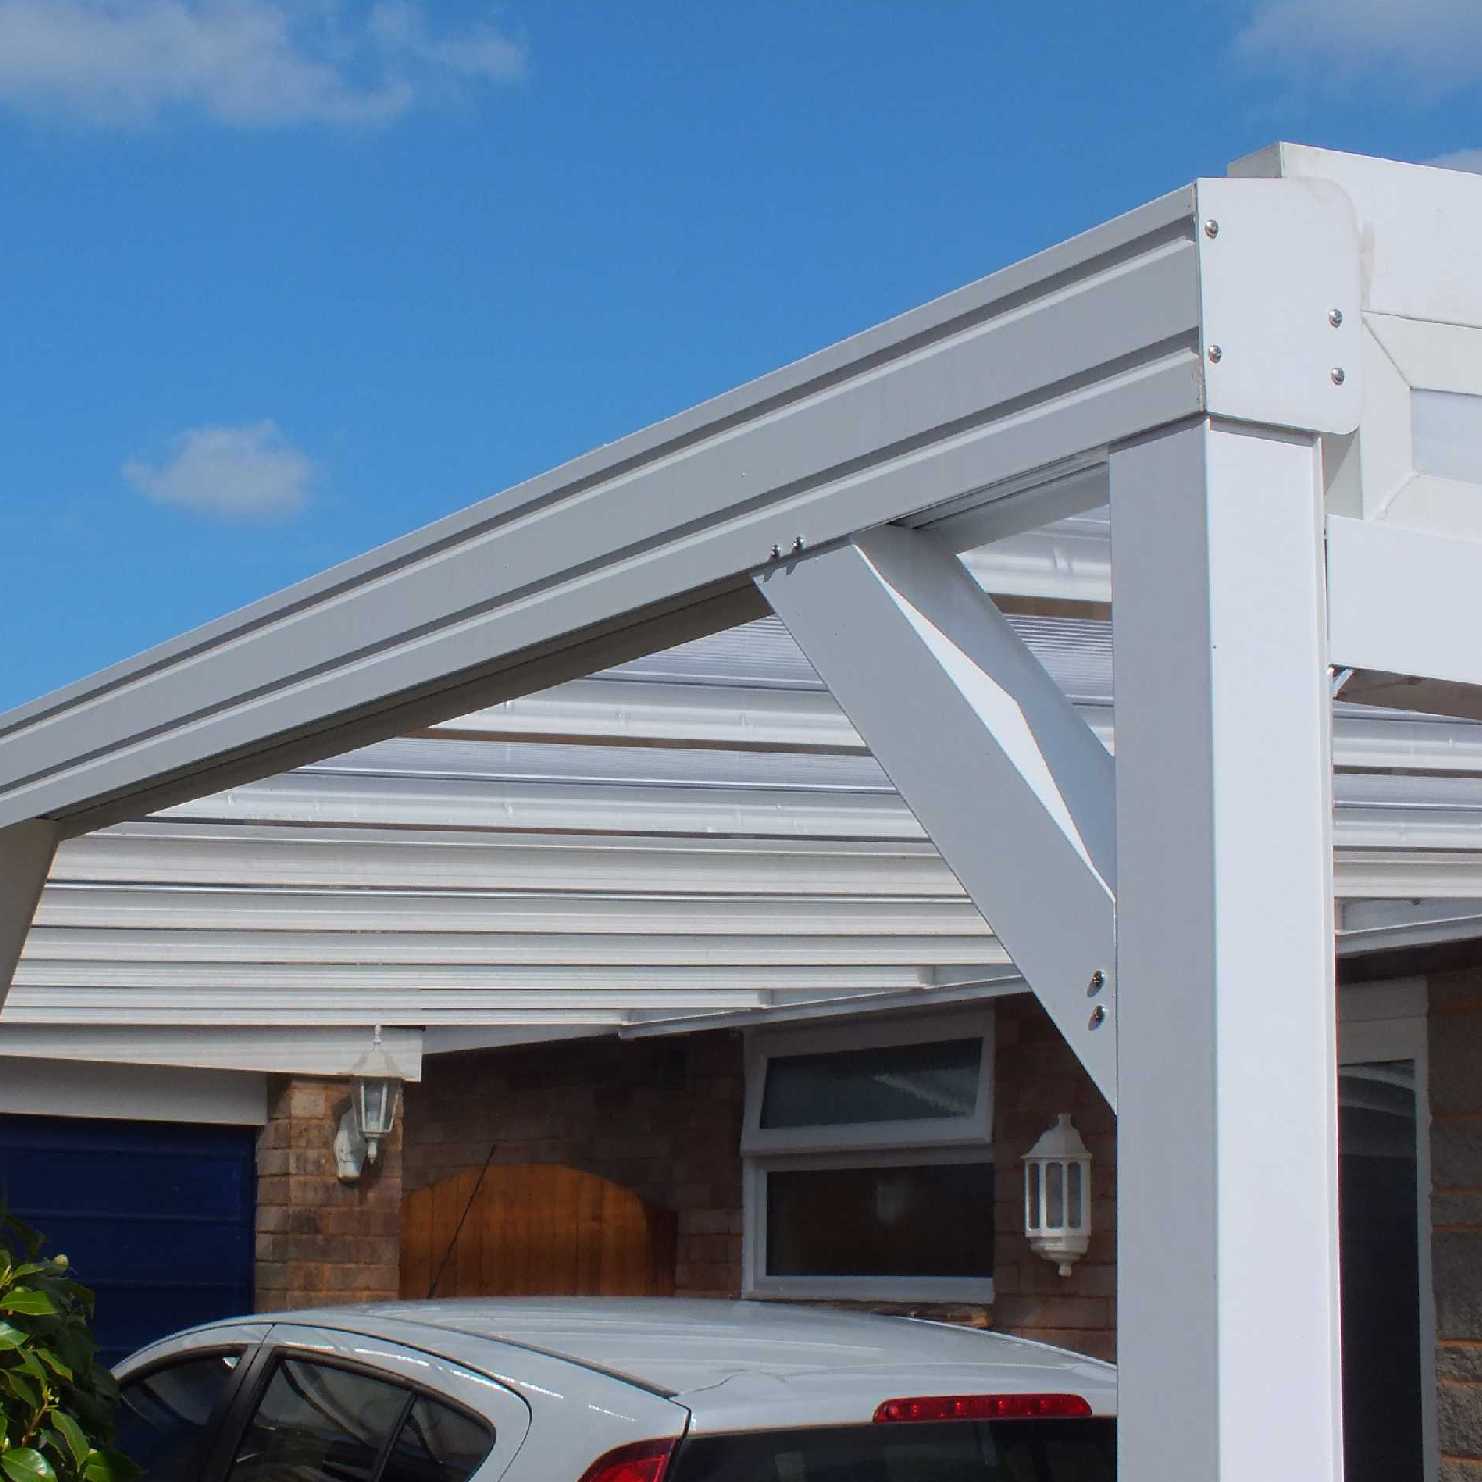 Great deals on Omega Smart Lean-To Canopy, White with 16mm Polycarbonate Glazing - 5.6m (W) x 4.0m (P), (3) Supporting Posts